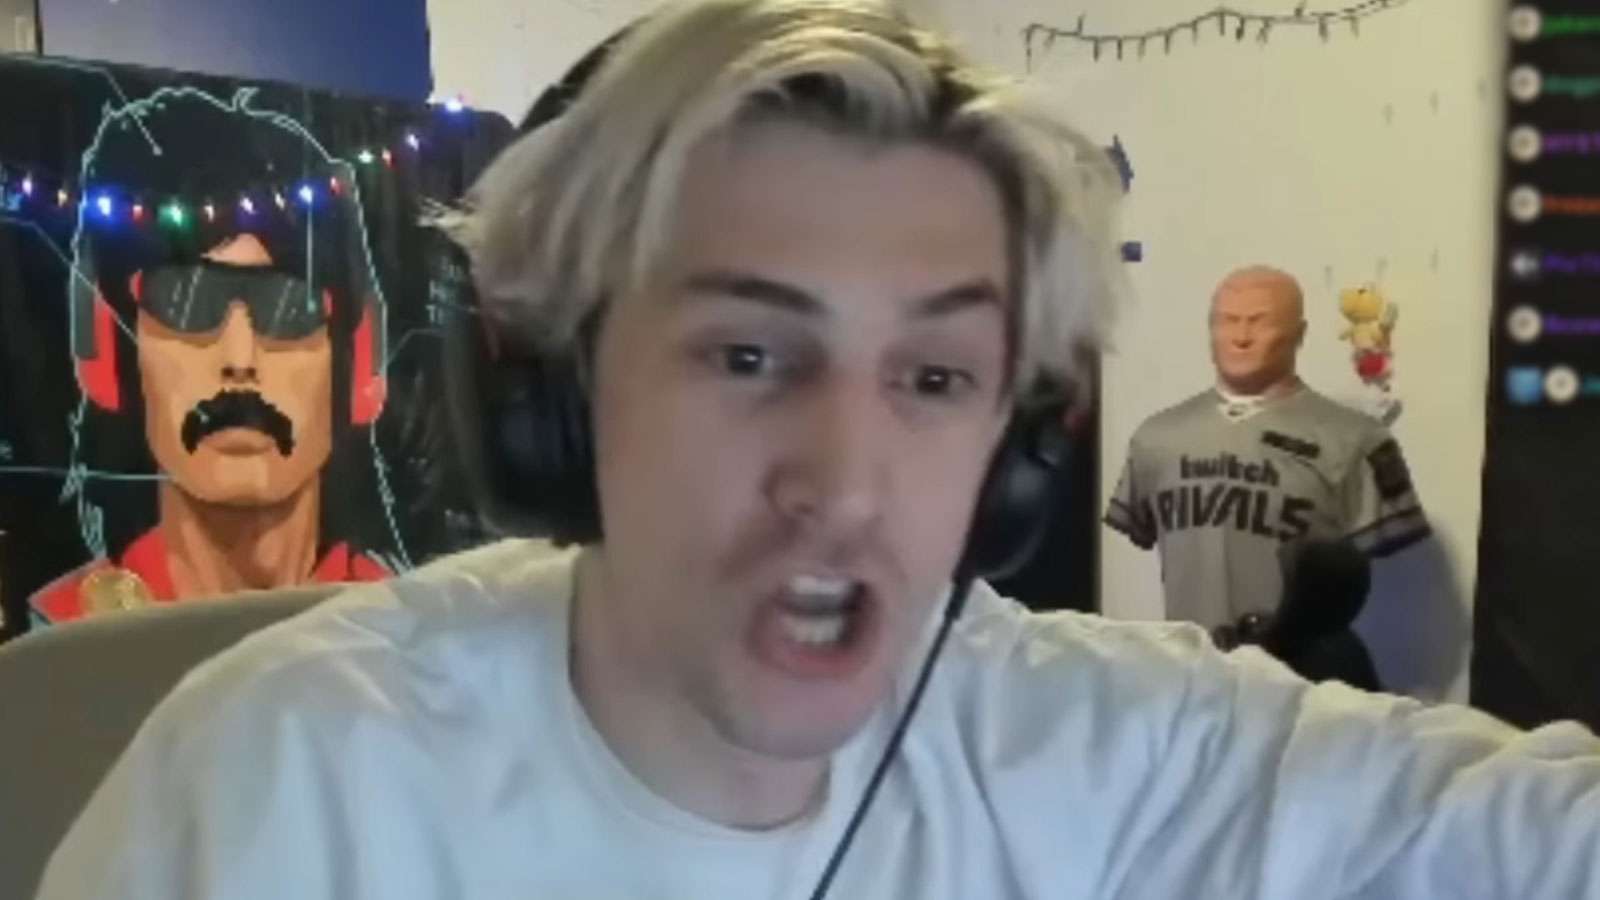 Twitch streamer xQc wearing white t-shirt and HyperX gaming headset